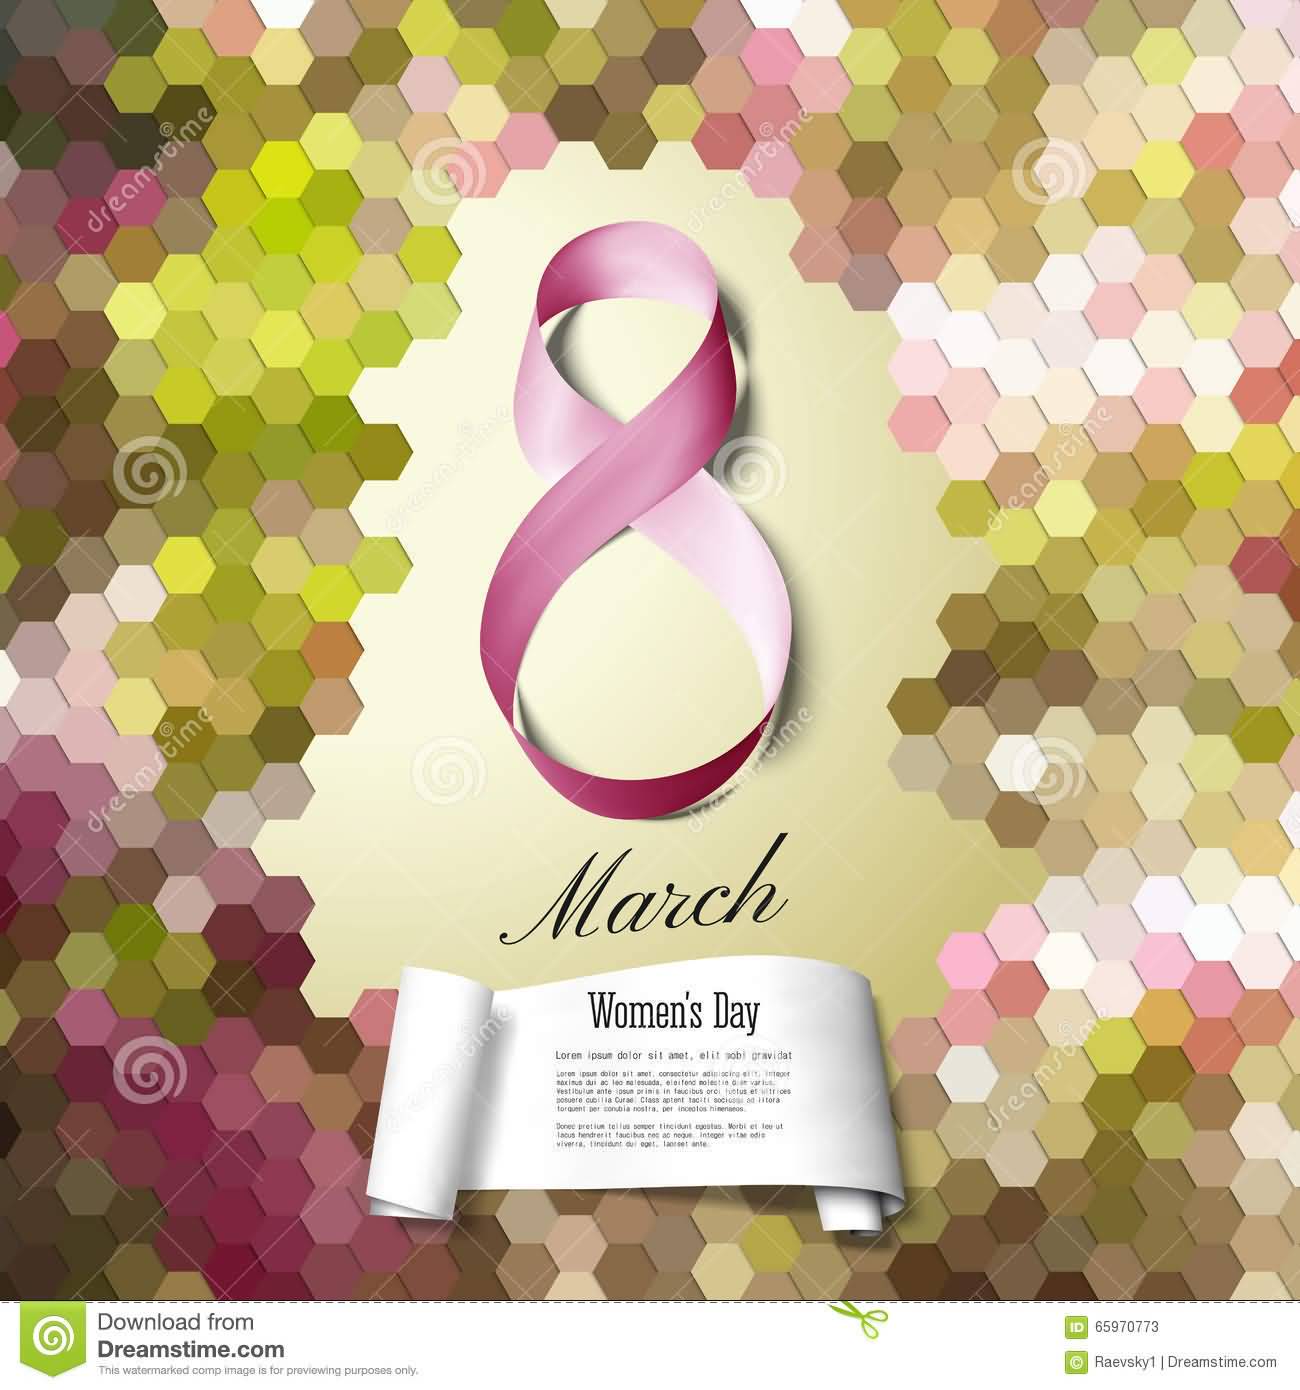 8 March Women’s Day Greeting Card With Symbol Of Pink Ribbon